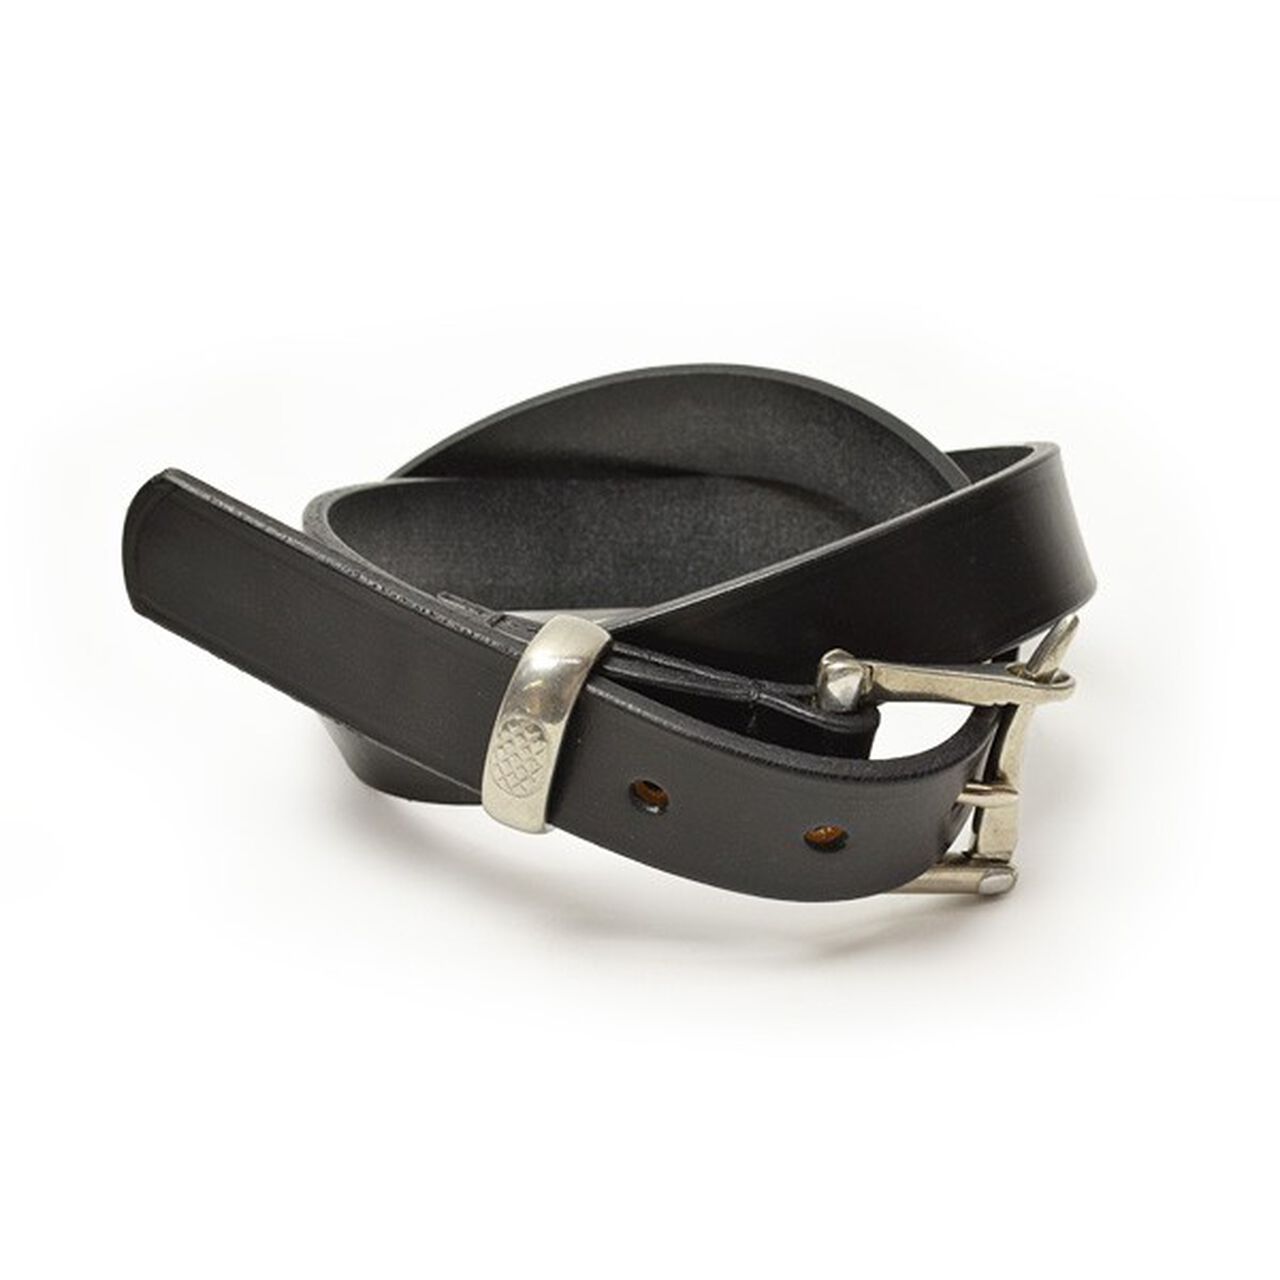 1.25 inch (30mm) quick release leather belt,BlackWithPewterBuckle, large image number 0